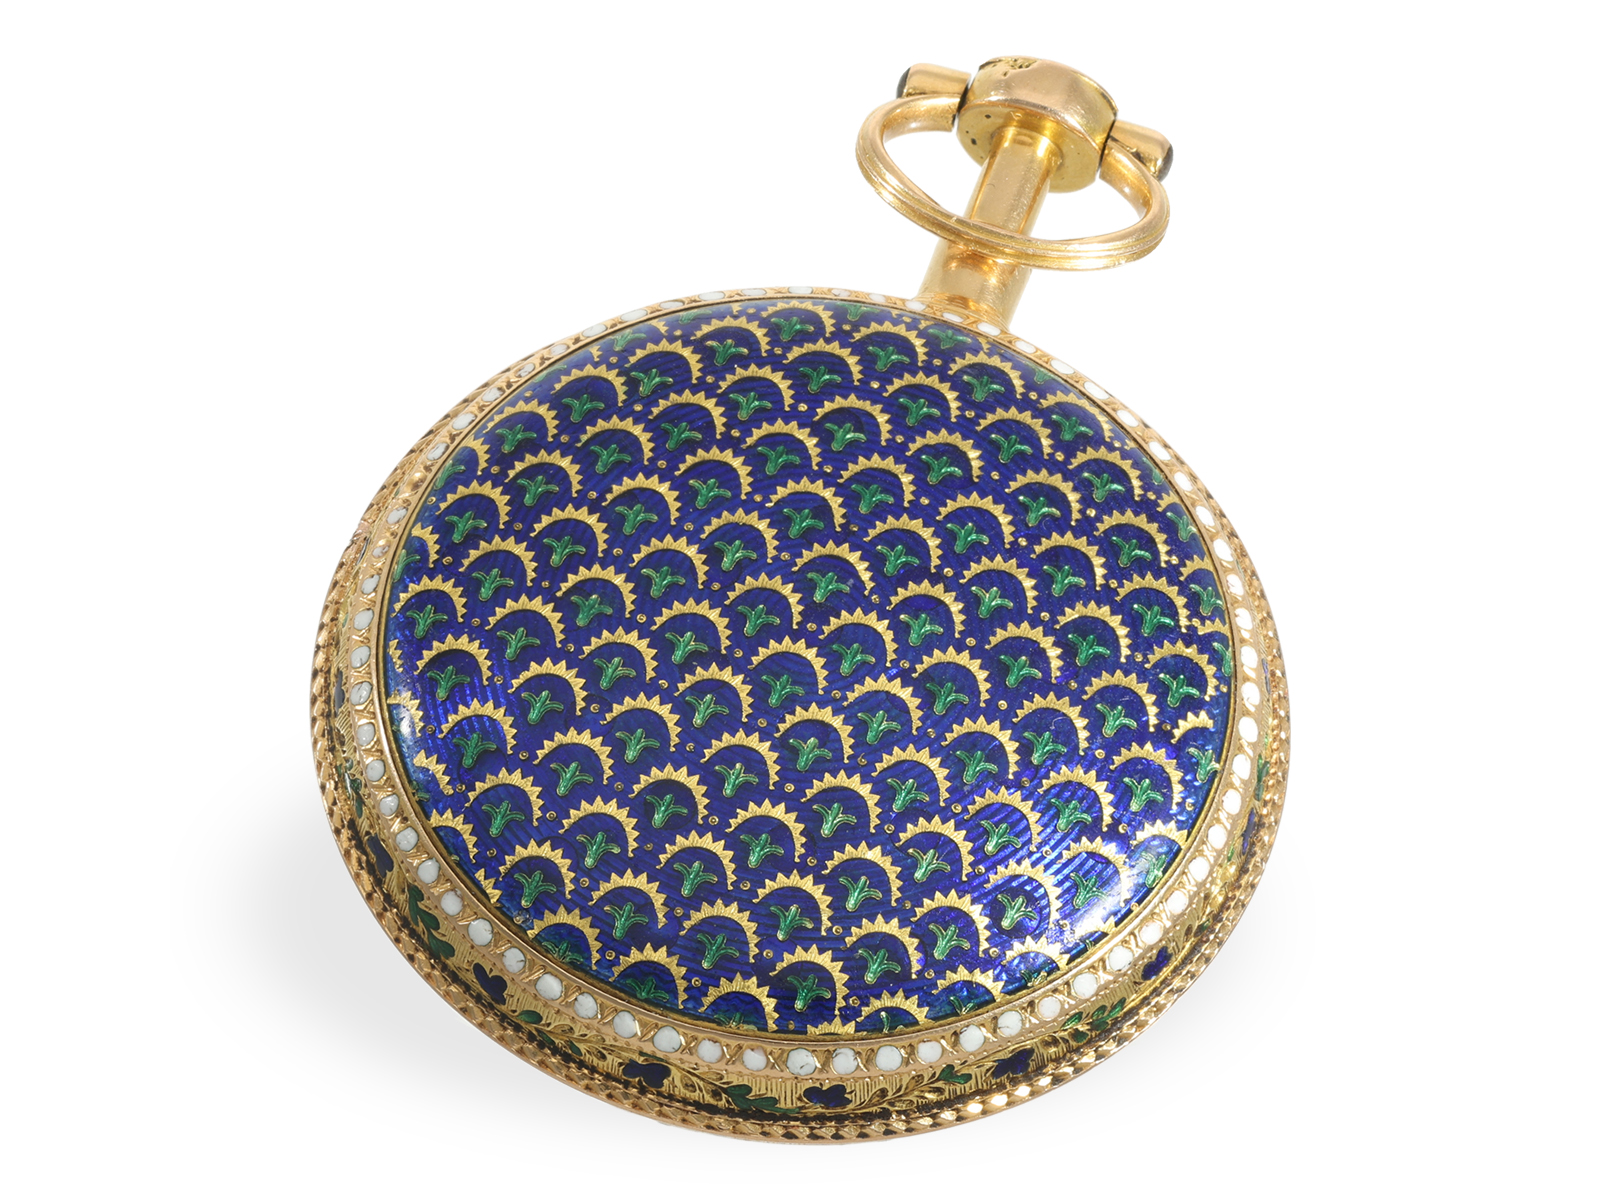 Pocket watch: very fine gold/enamel verge watch with intricate paillone enamelling, Guenoux a Paris, - Image 4 of 5